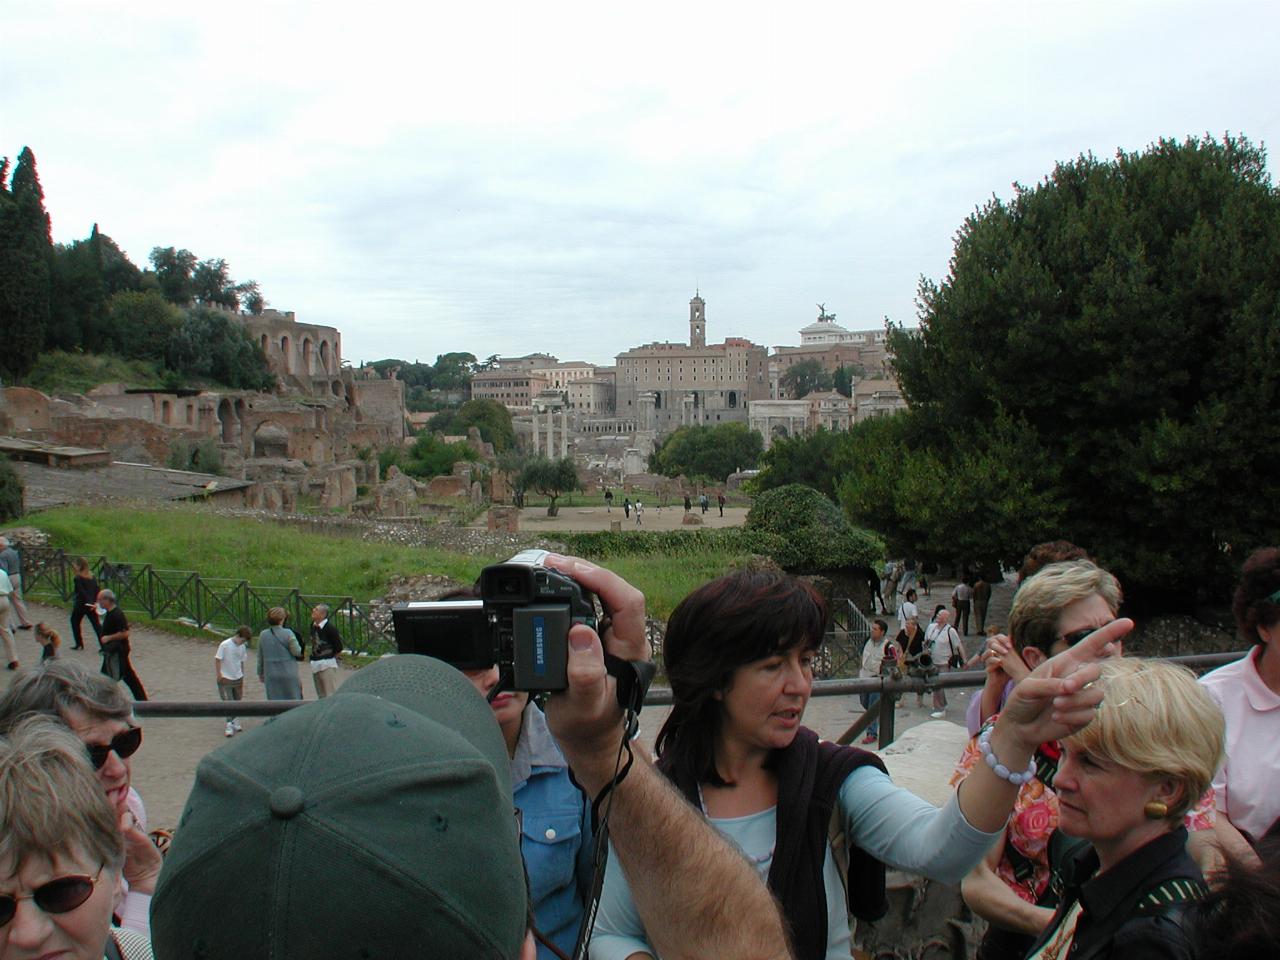 Looking over Forum Romanum from near Arch of Titus